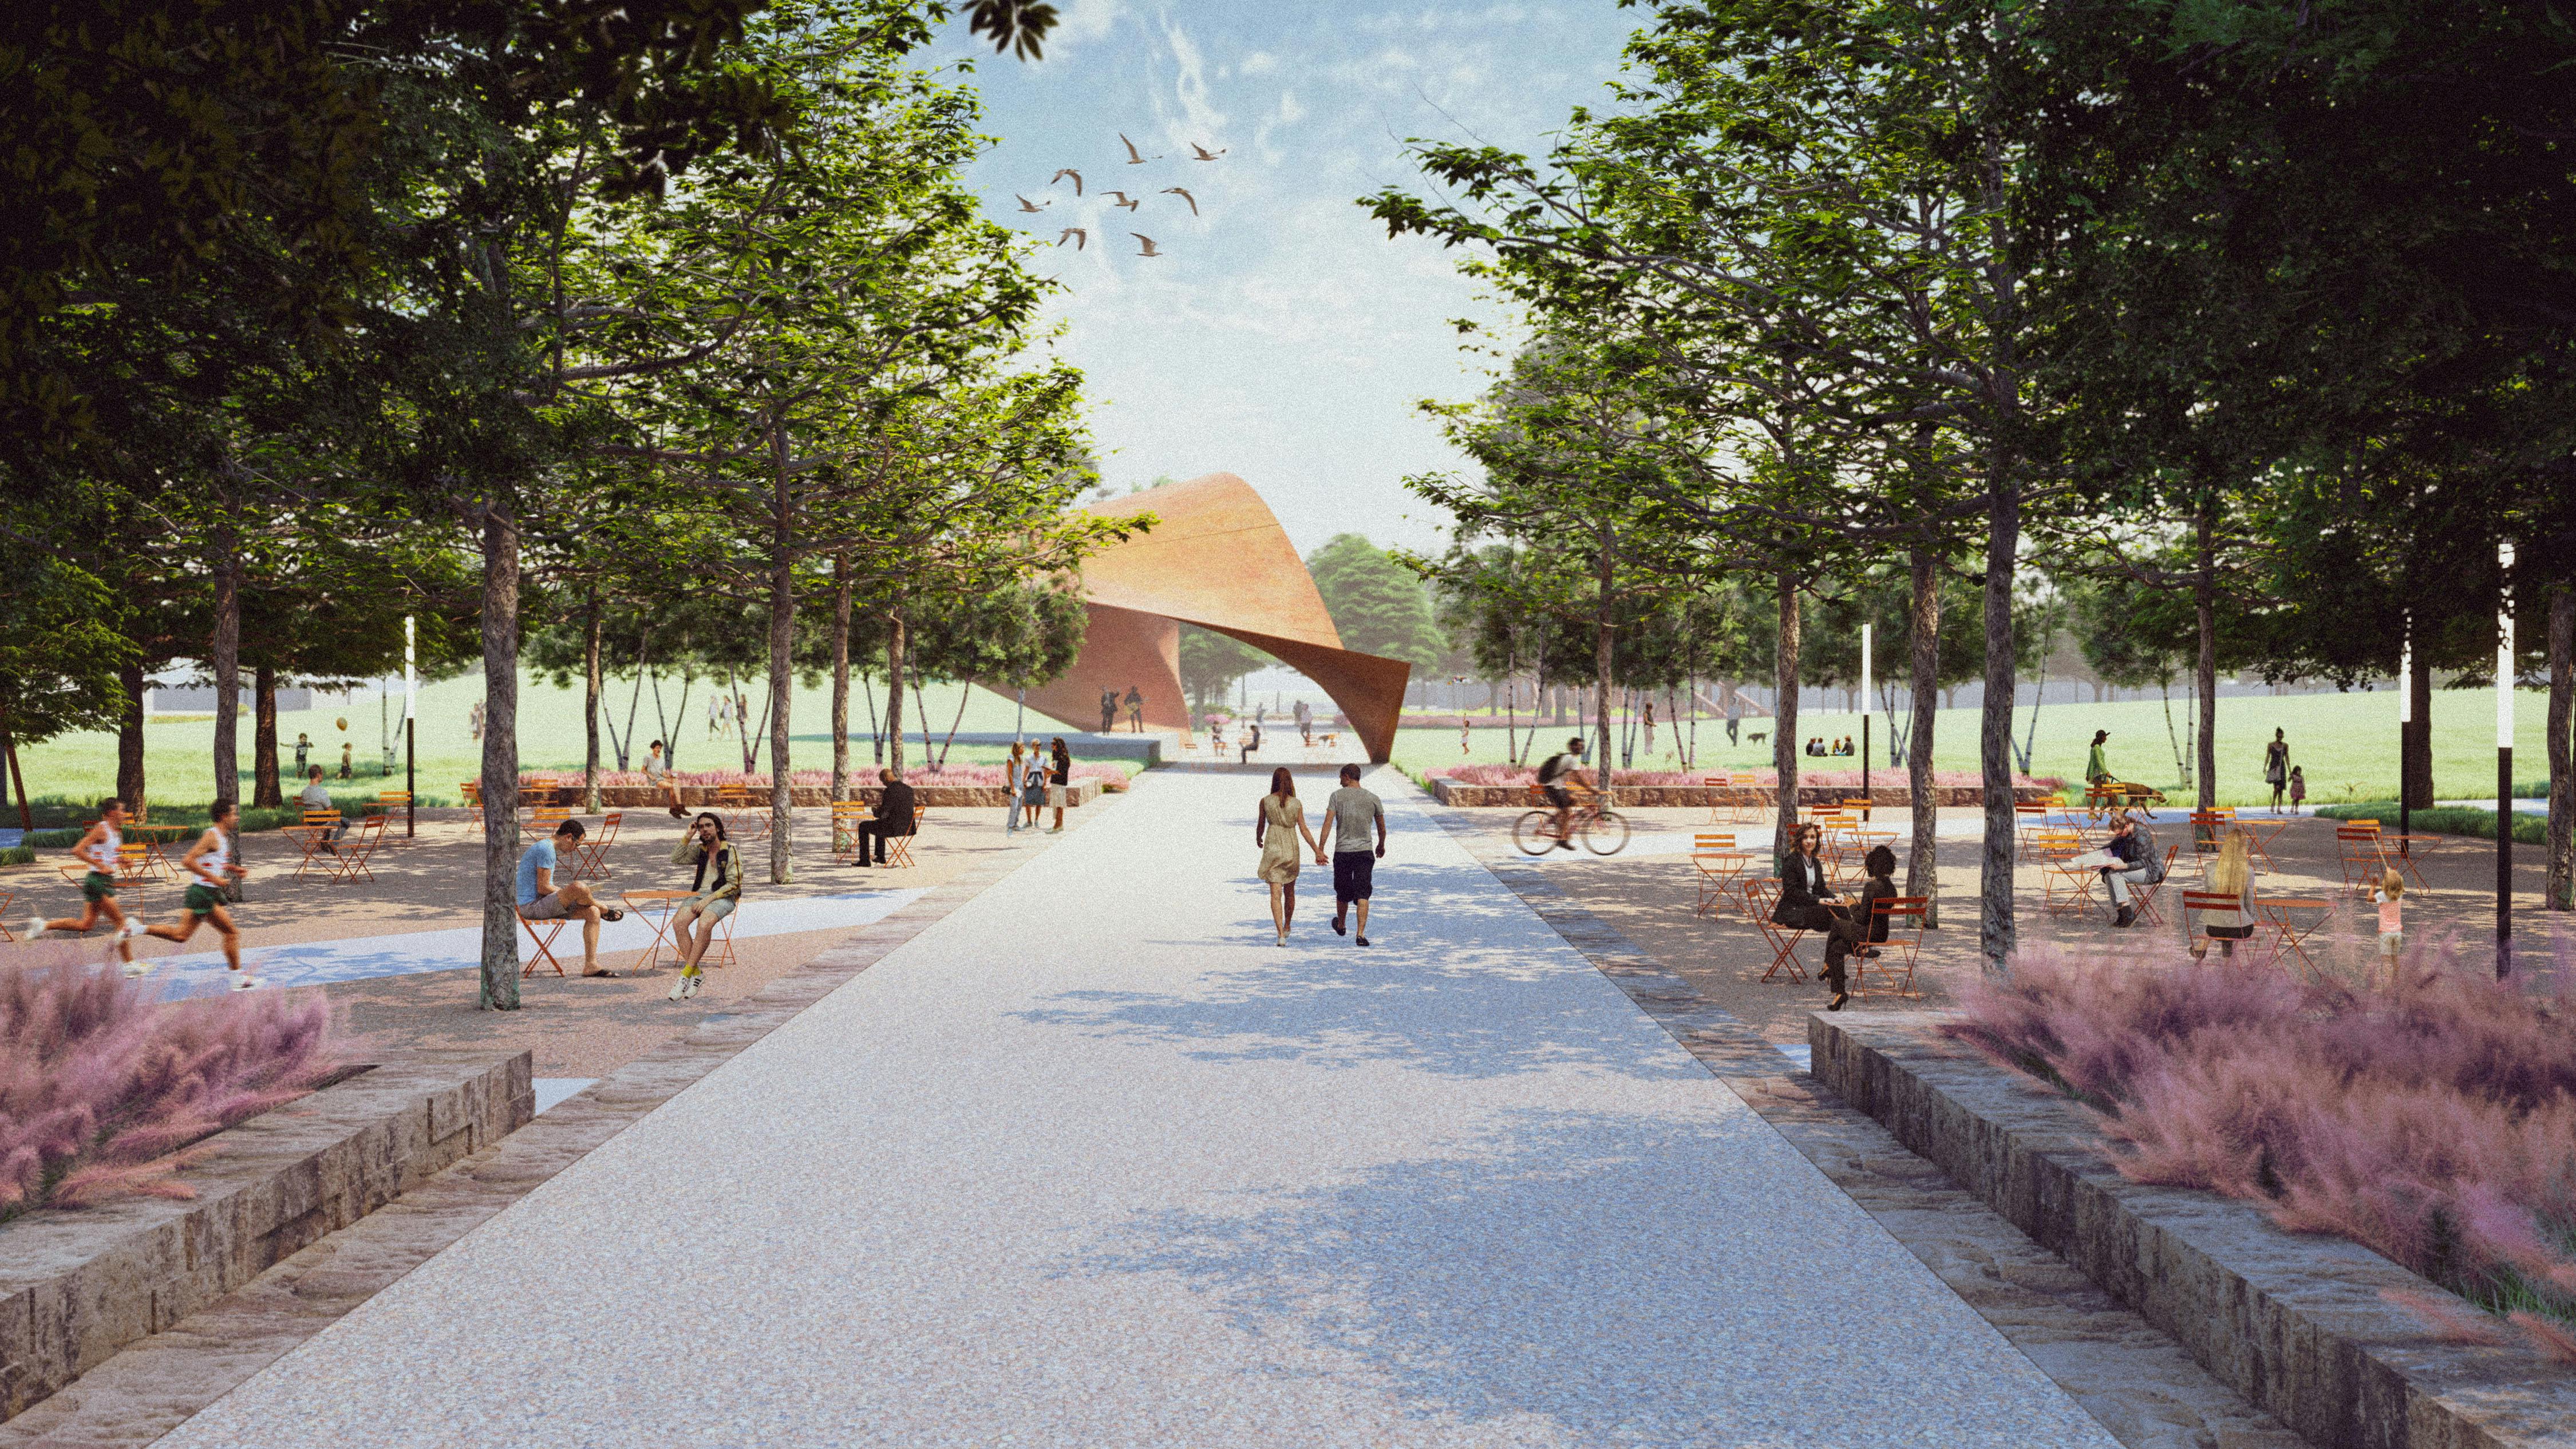 A perspective rendering of tree-lined central park path with cafe tables on both sides, people sit and enjoy the serene atmosphere, with performance pavilion in the background.